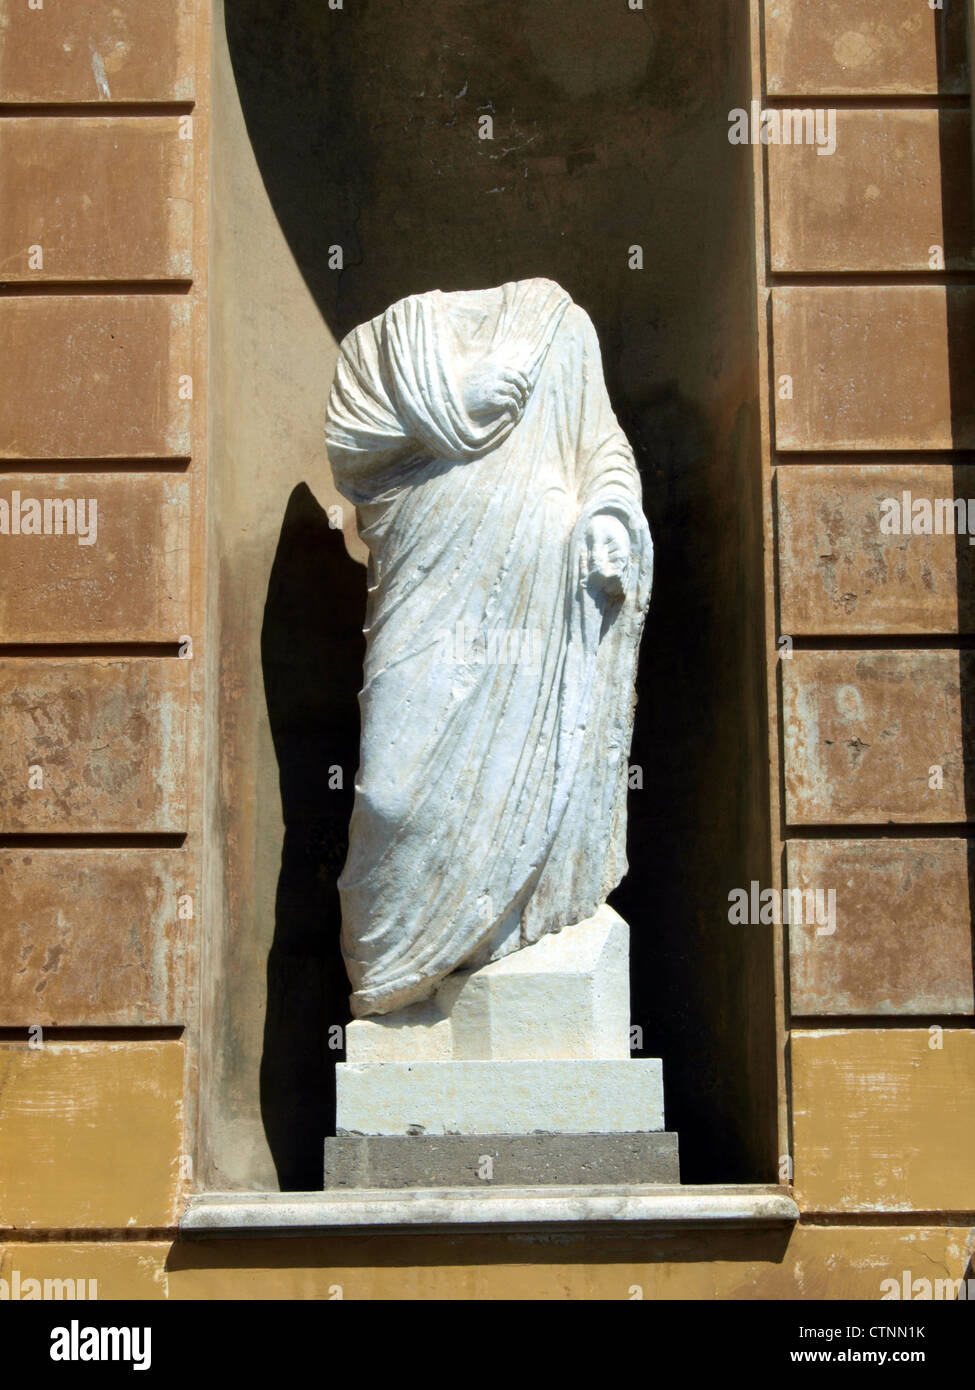 Sculpture of a buste outside in the Vatican museum Stock Photo